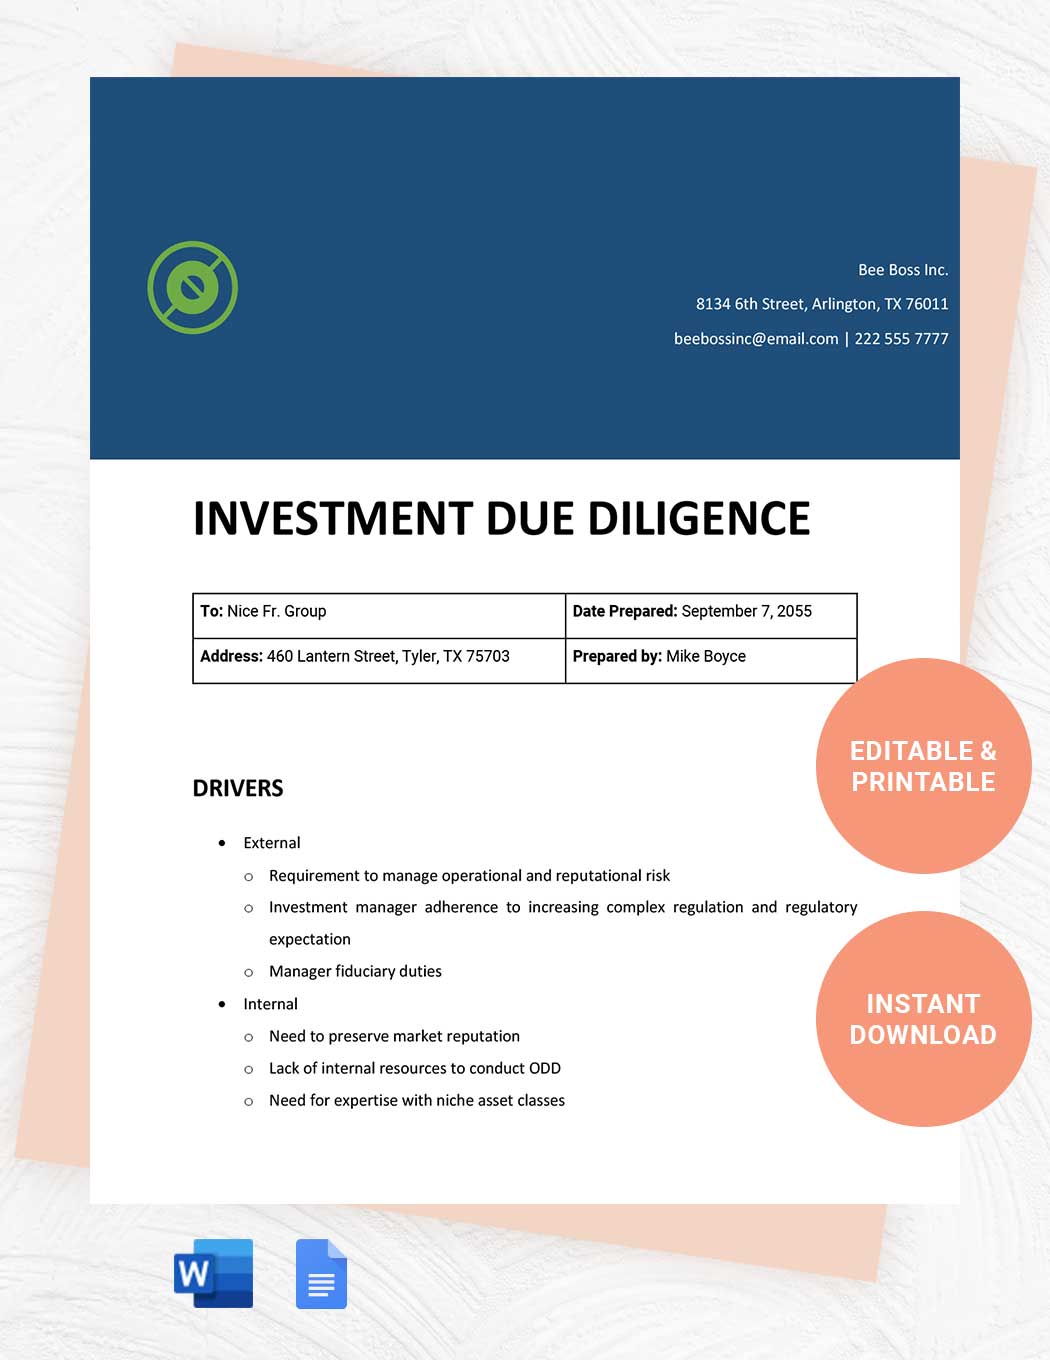 Investment Due Diligence